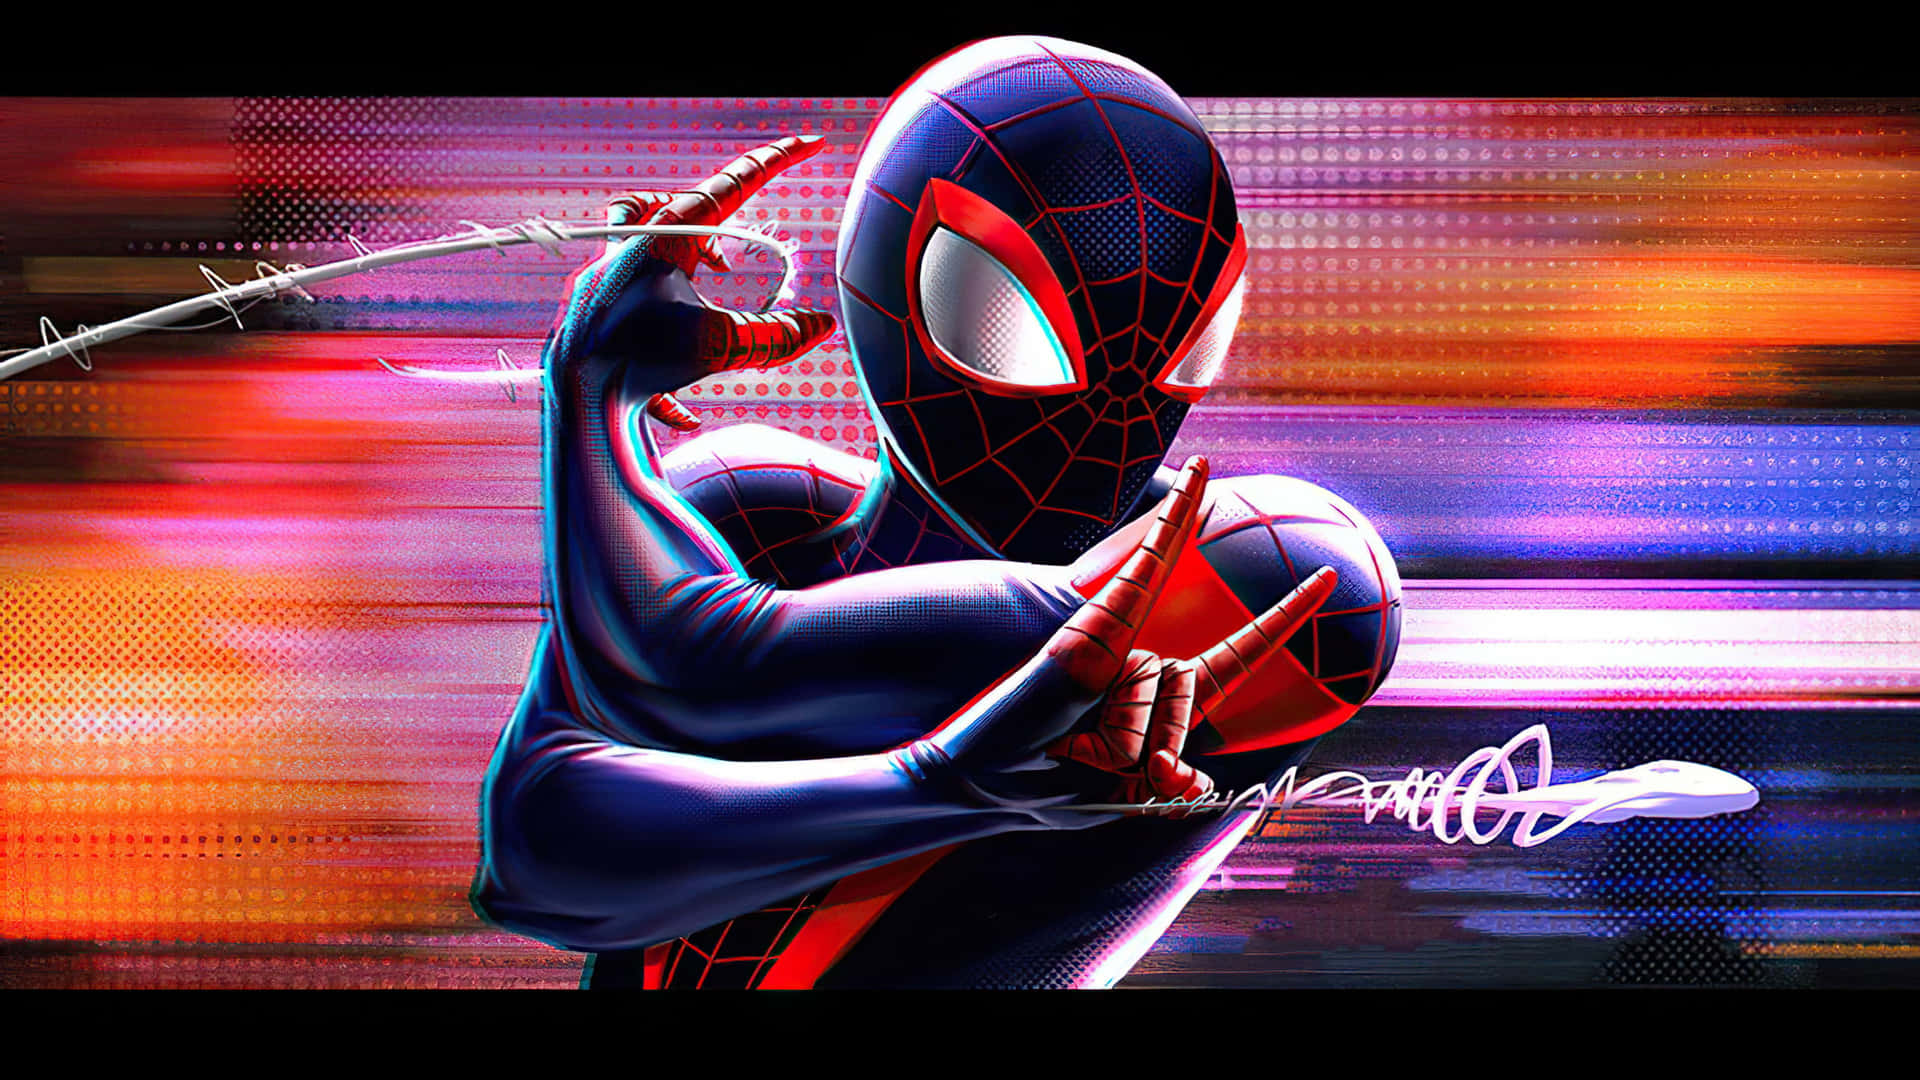 Spider-Man showcasing his web-shooting abilities in action Wallpaper